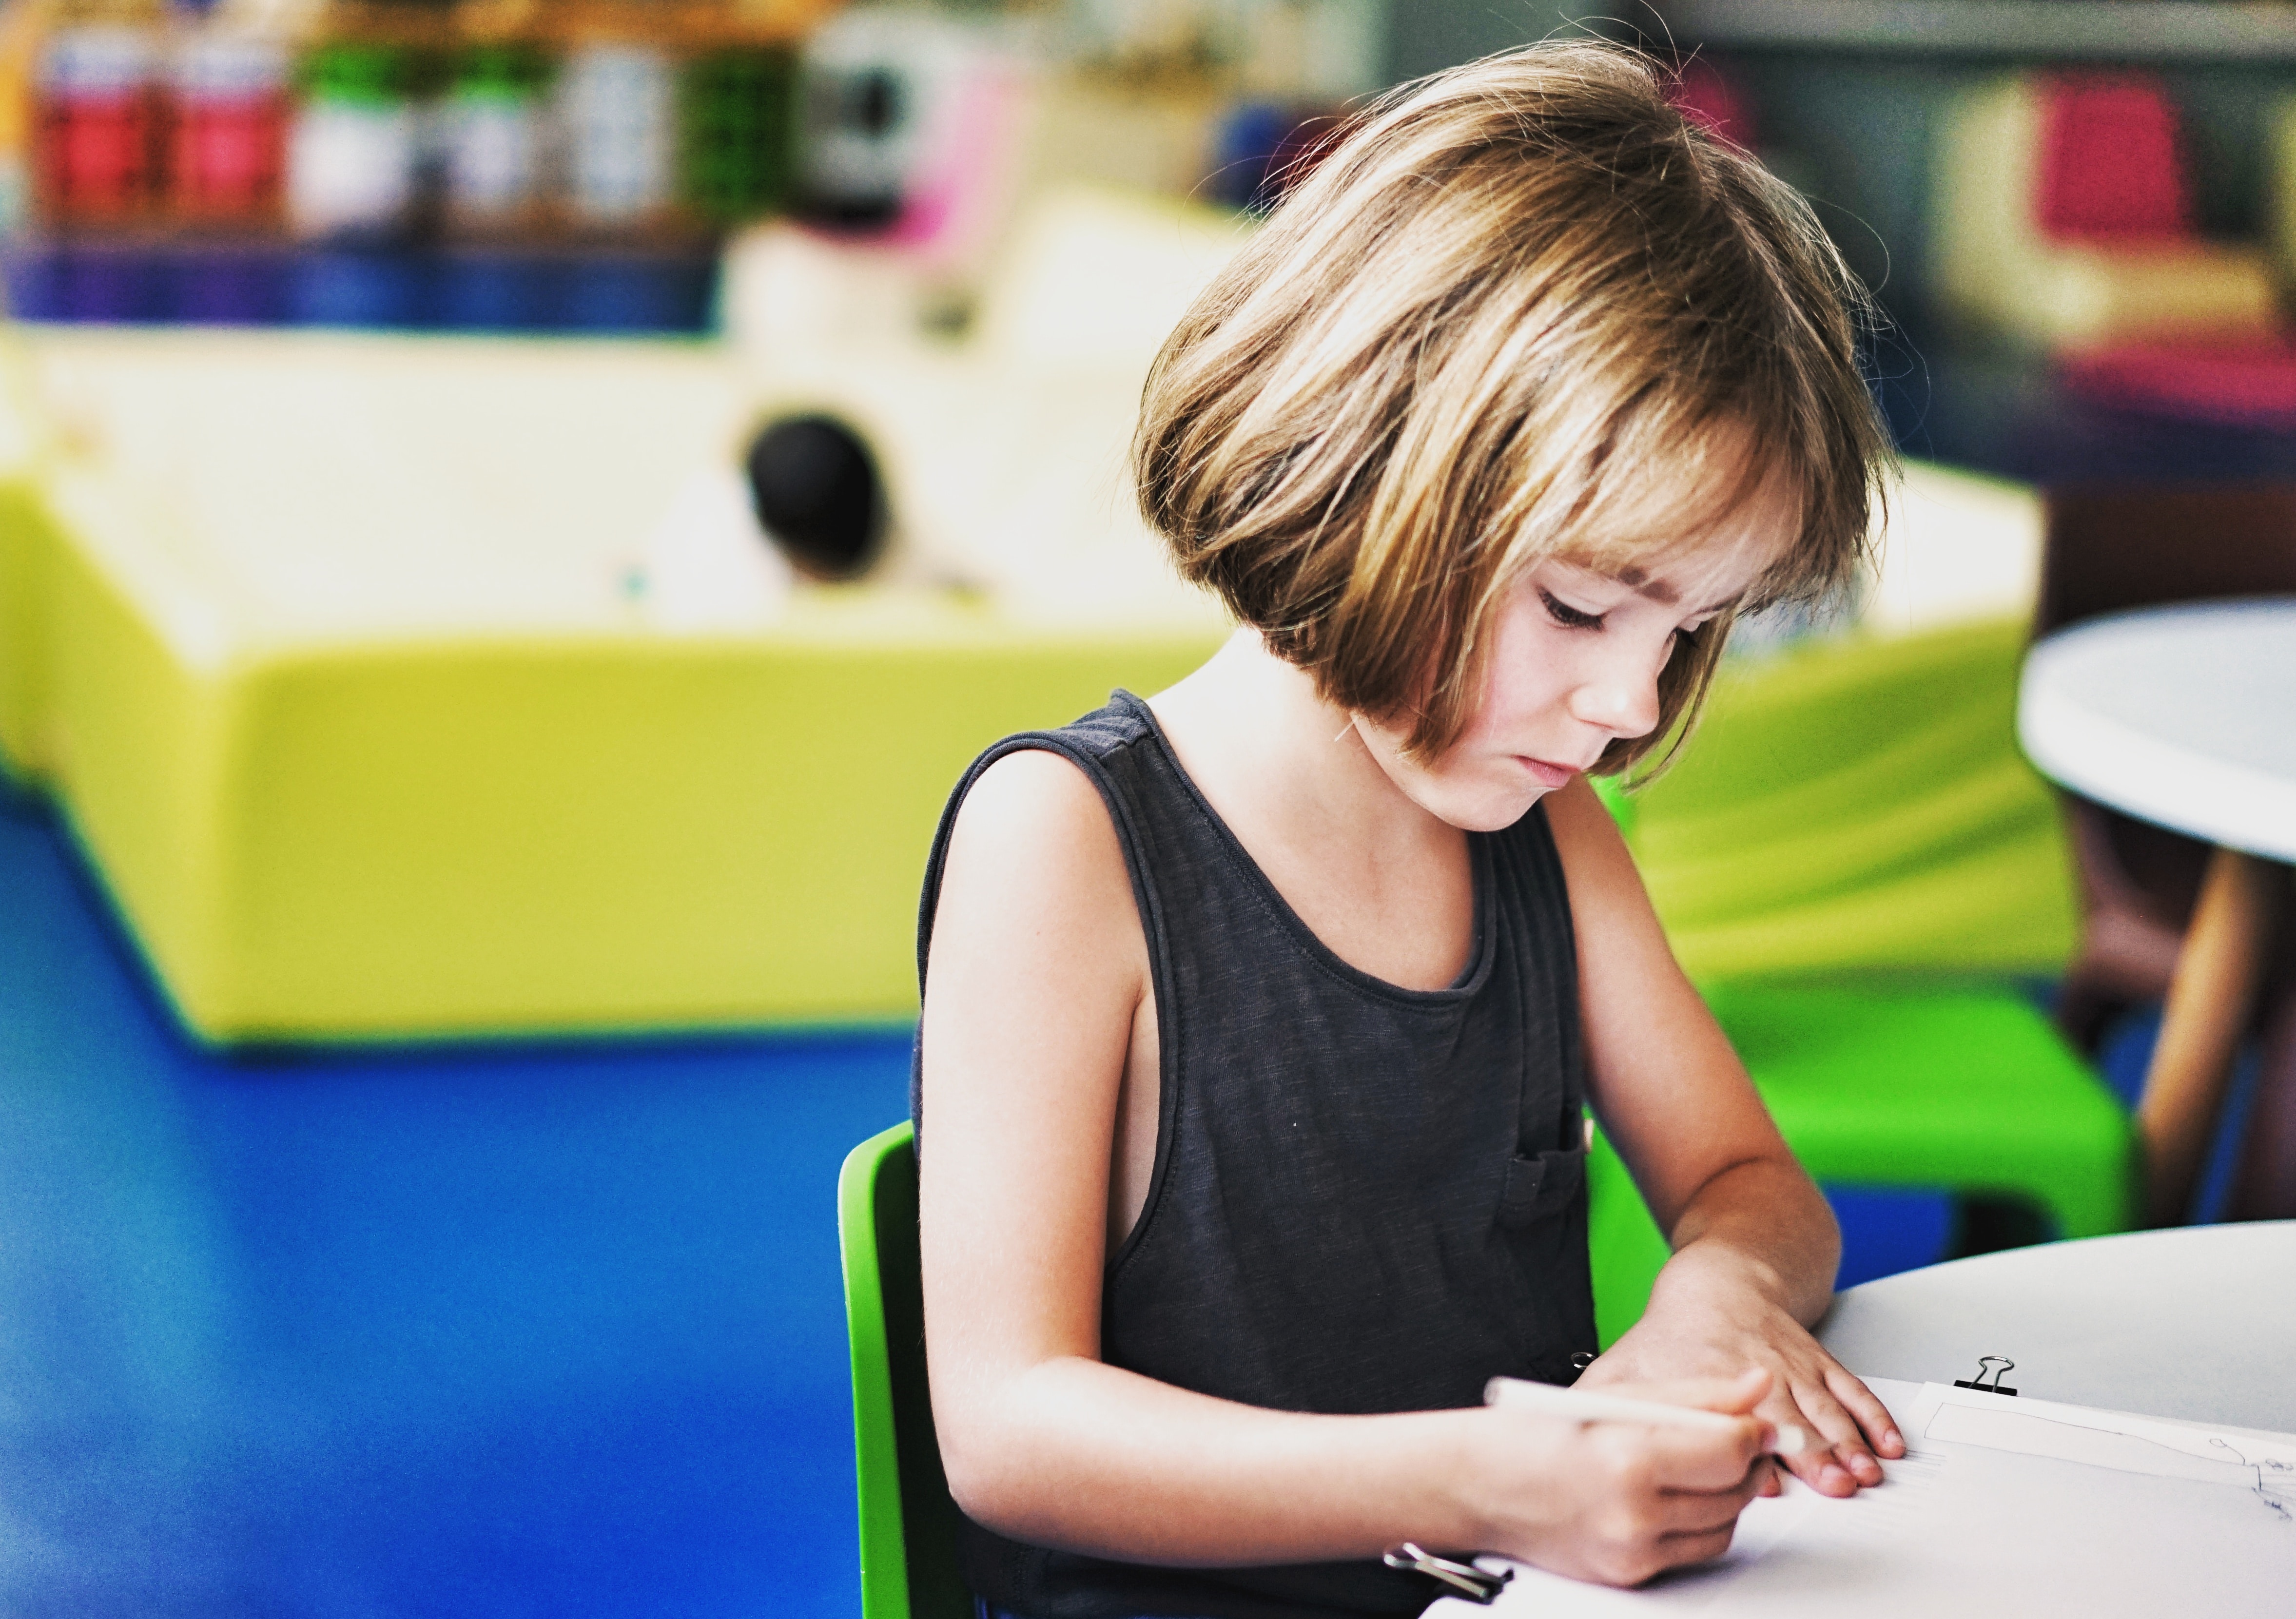 Child sitting at a table by herself and writing.